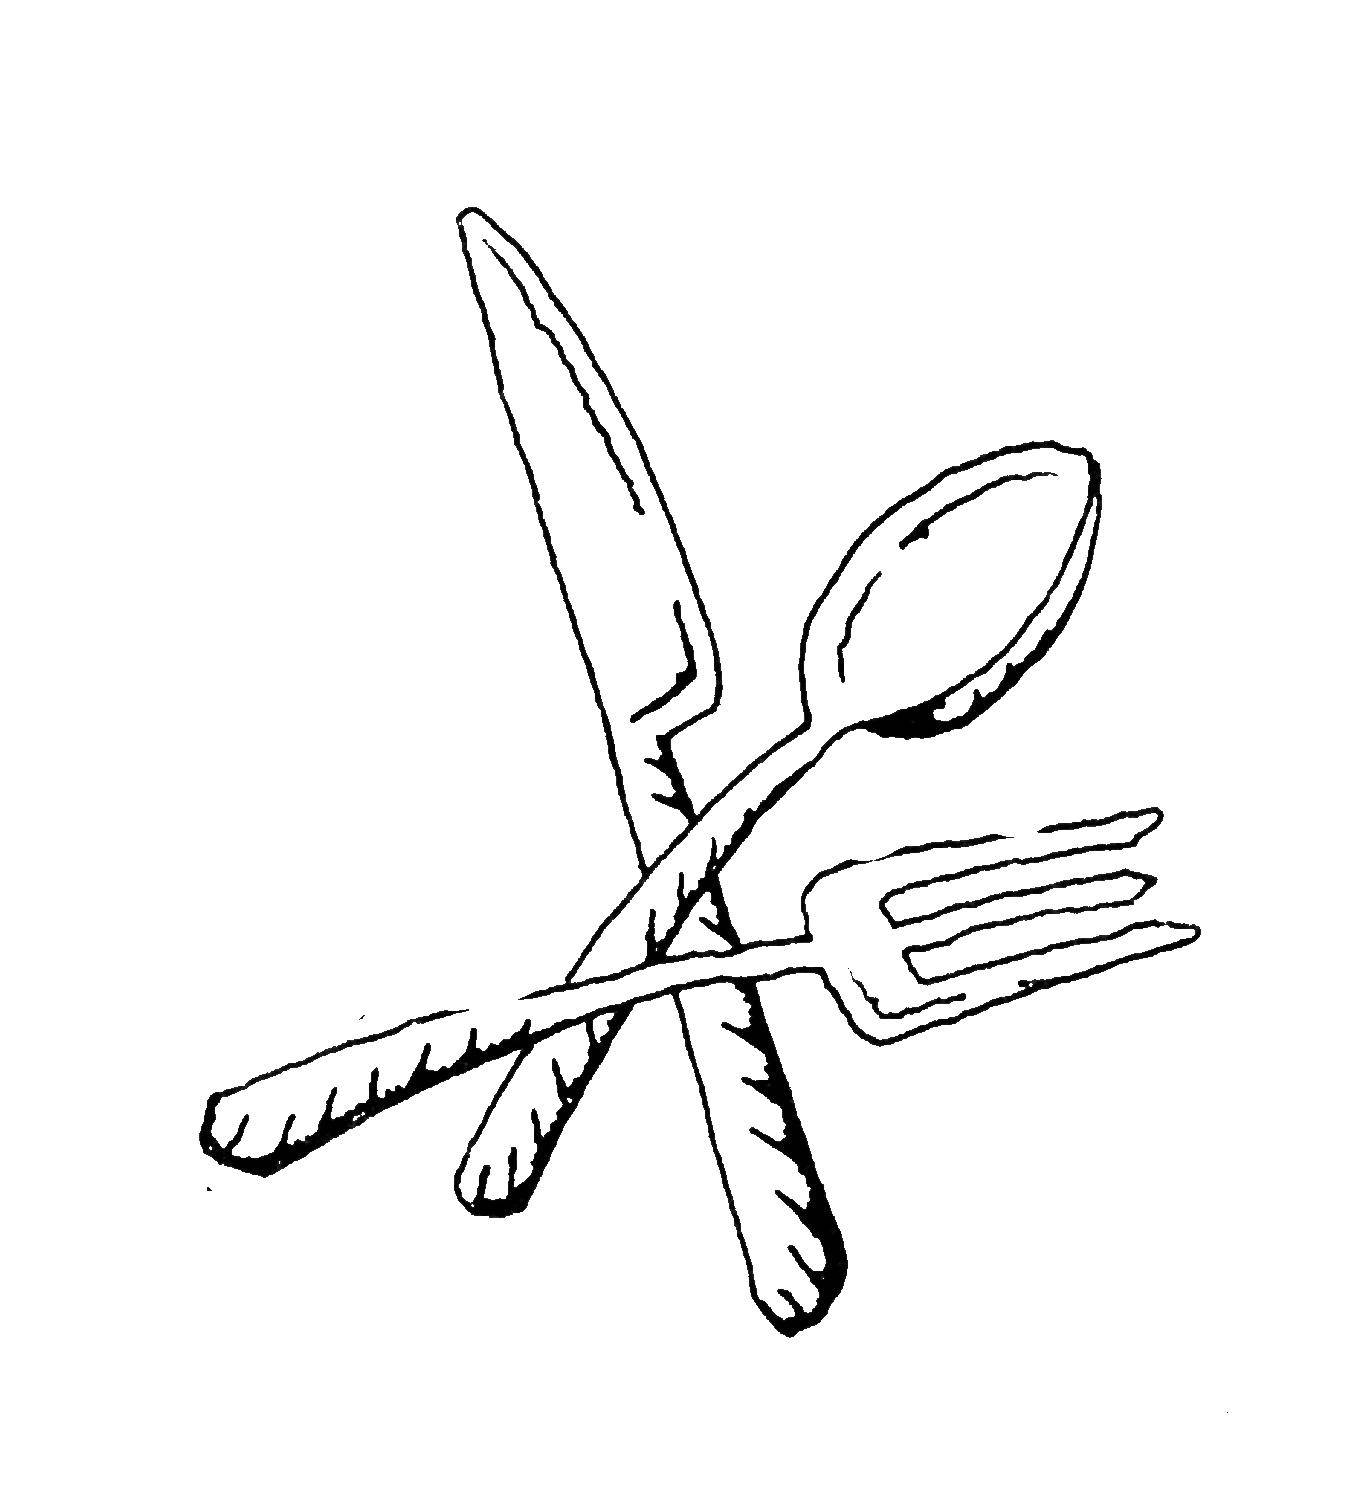 Online coloring pages coloring page cutlery spoon download print coloring page